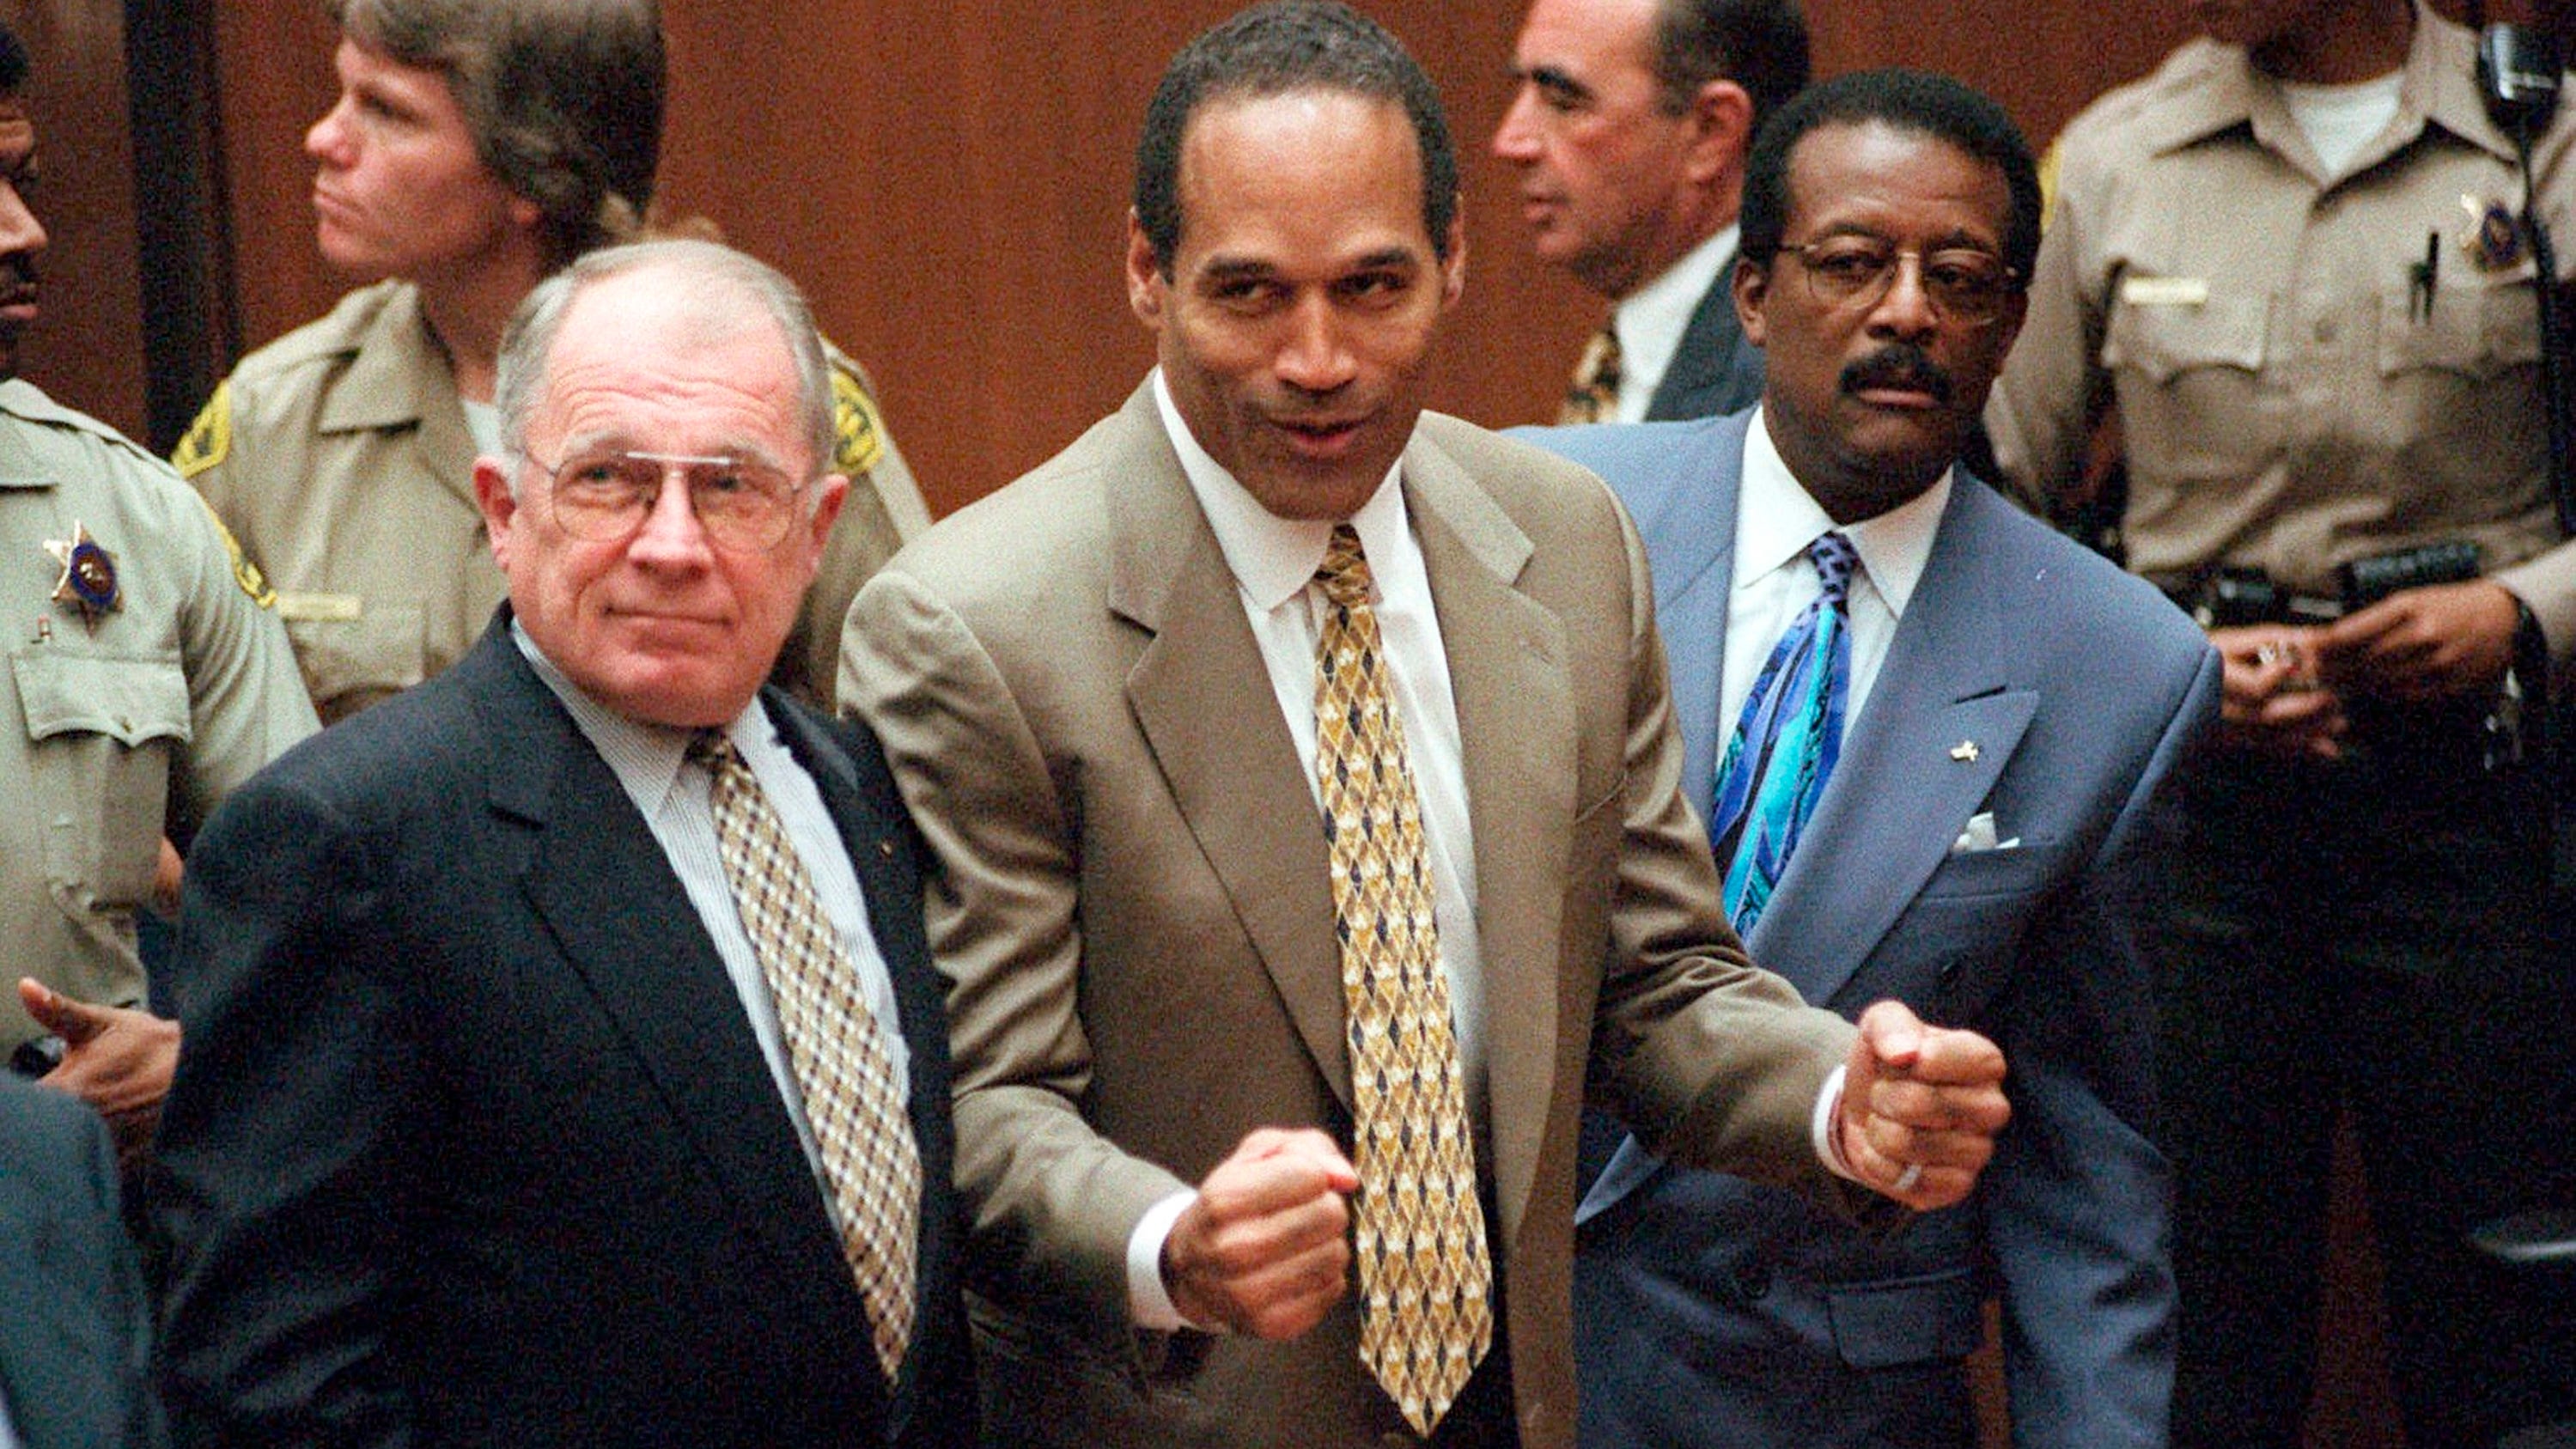 O.J. Simpson murder trial where the key figures are now